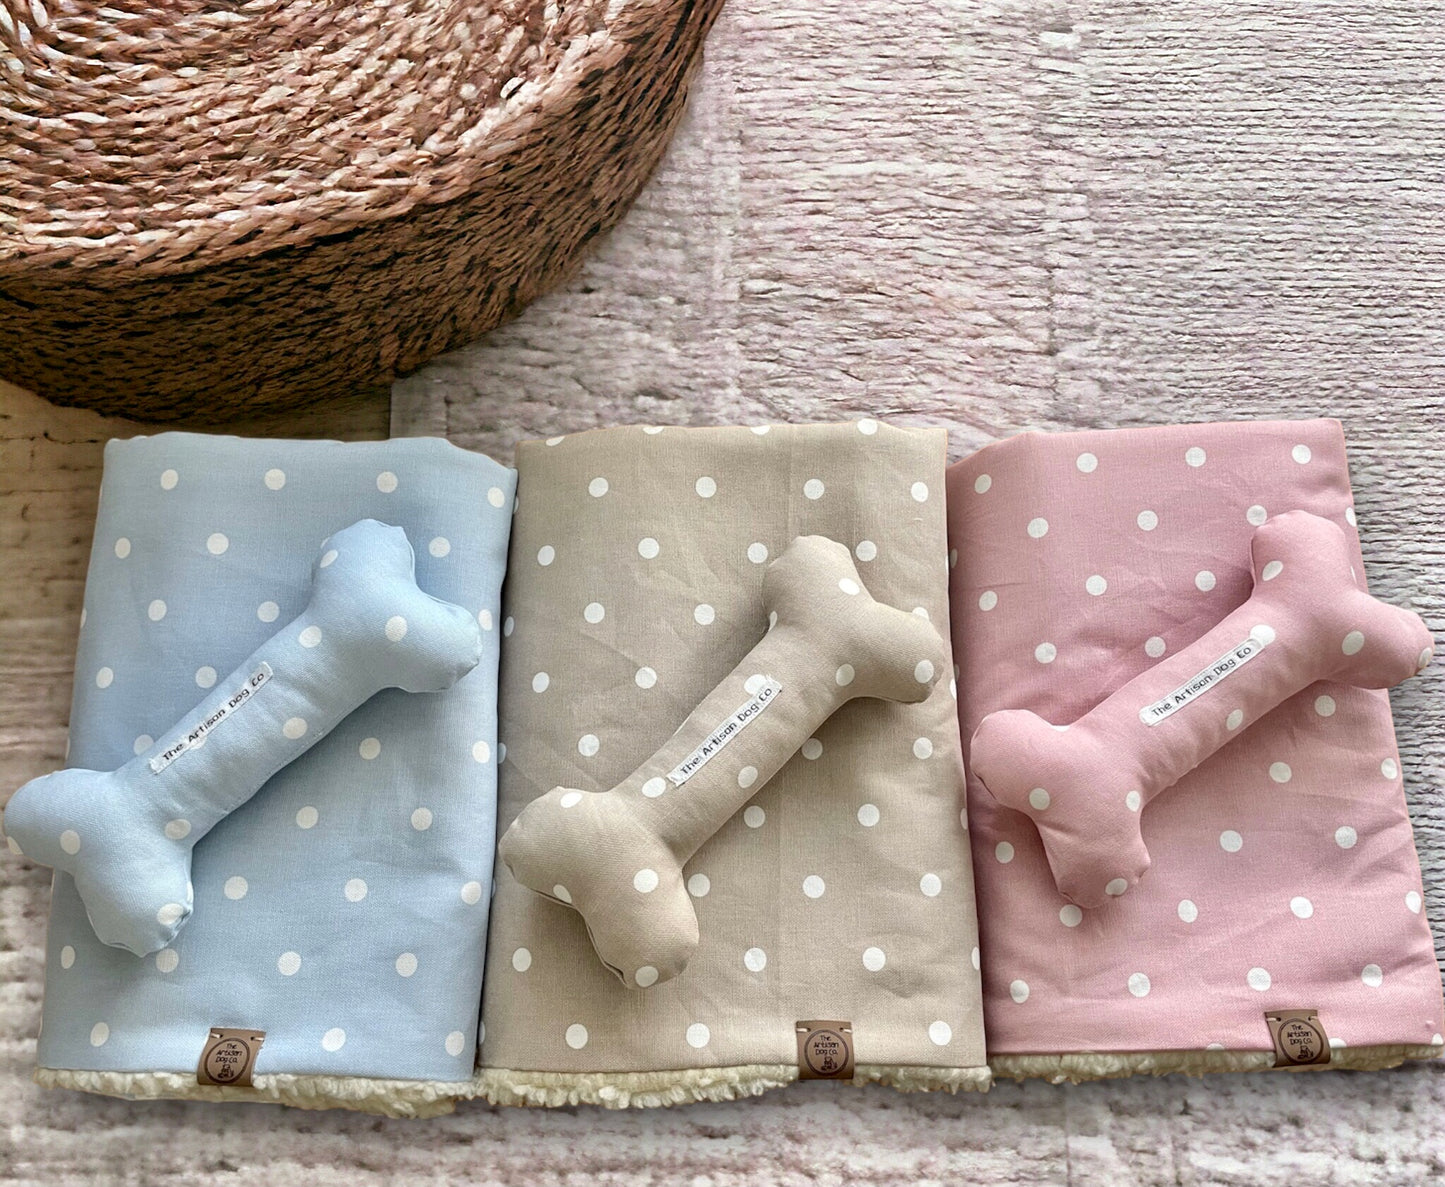 New Puppy Gift Pack: Blanket, Pillow, Toy Bone and Milestone cards - Pink Spotty